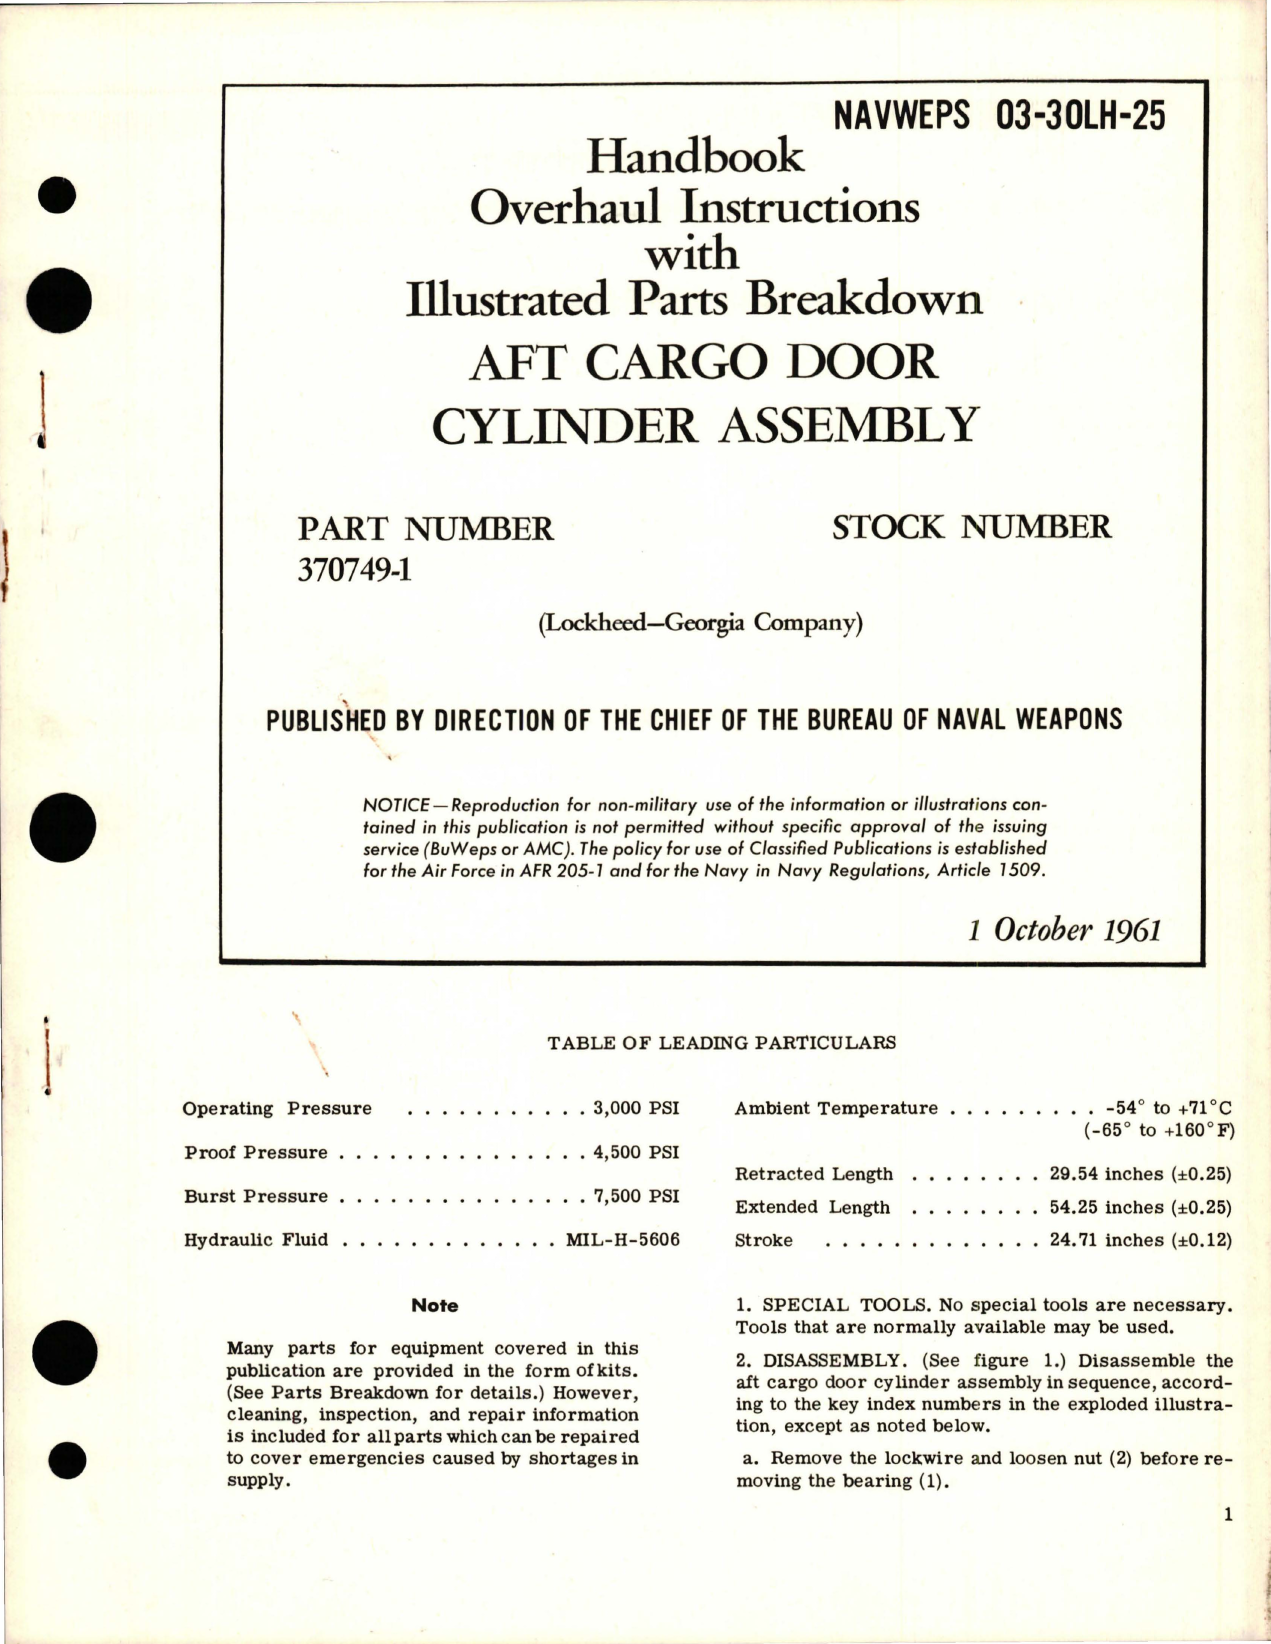 Sample page 1 from AirCorps Library document: Overhaul Instructions with Illustrated Parts Breakdown for AFT Cargo Door Cylinder Assembly - Part 370749-1